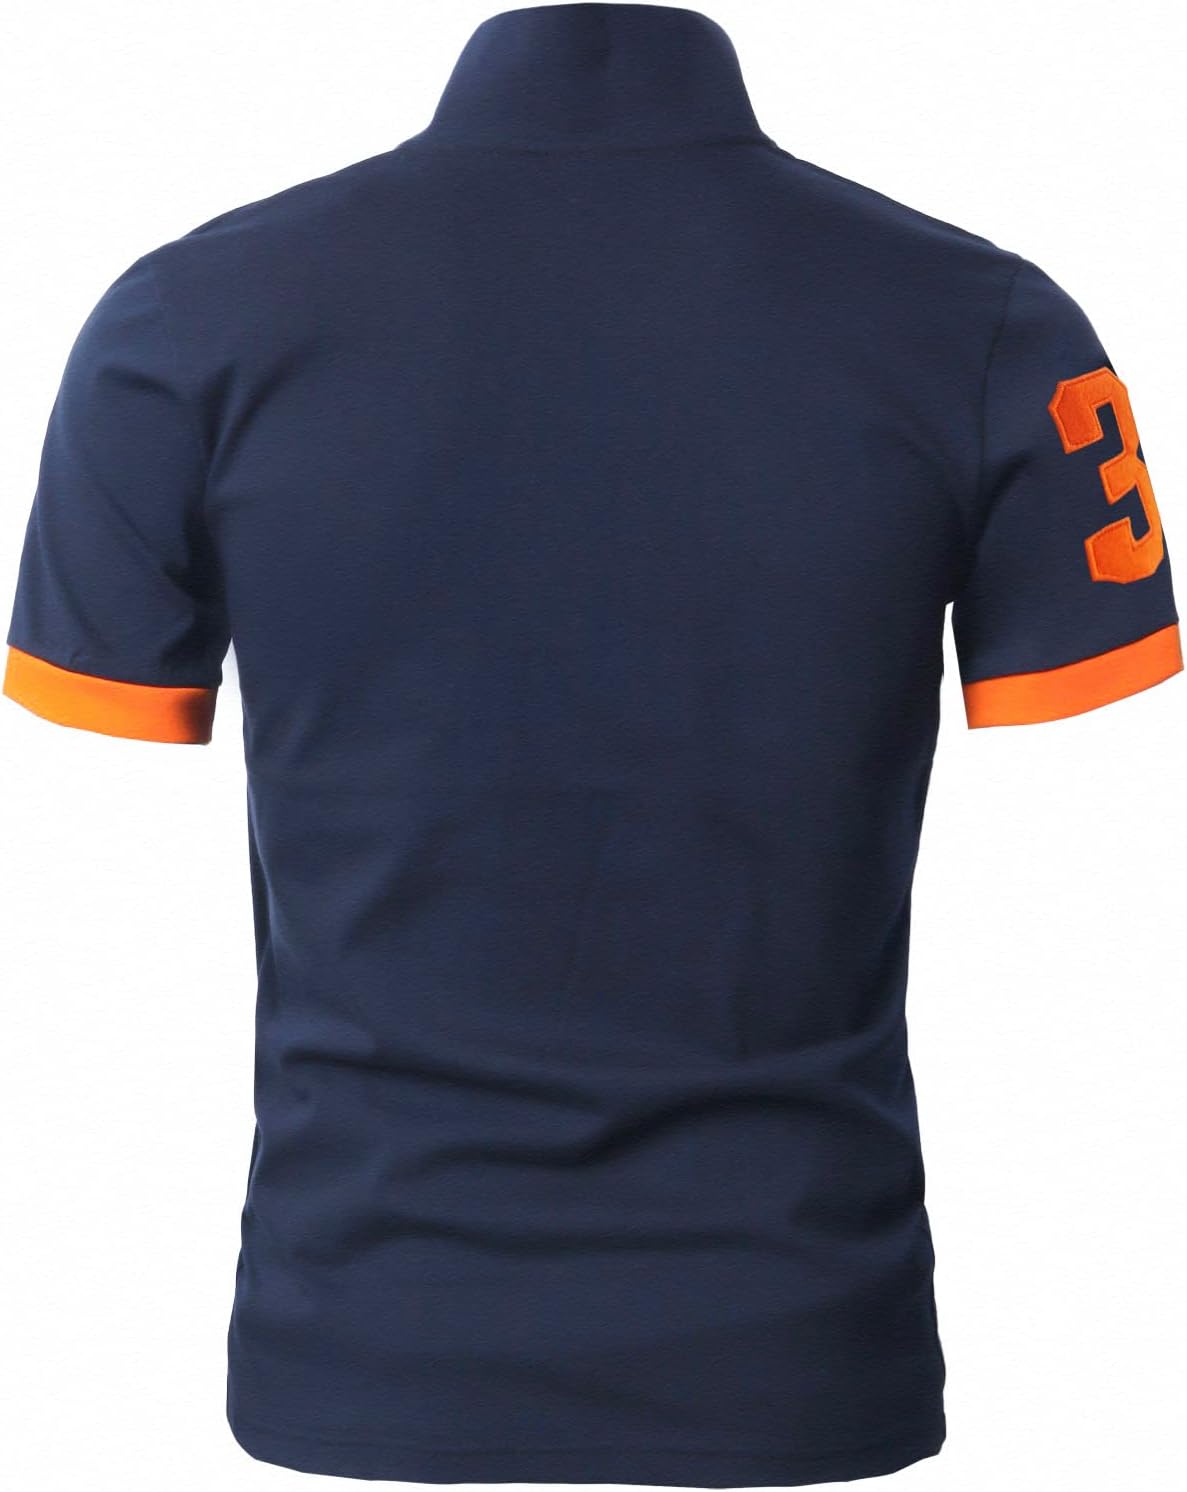 GLESTORE Polo pour Homme, T-Shirts, Chemise Homme à Manches Courtes - fitnessterapy